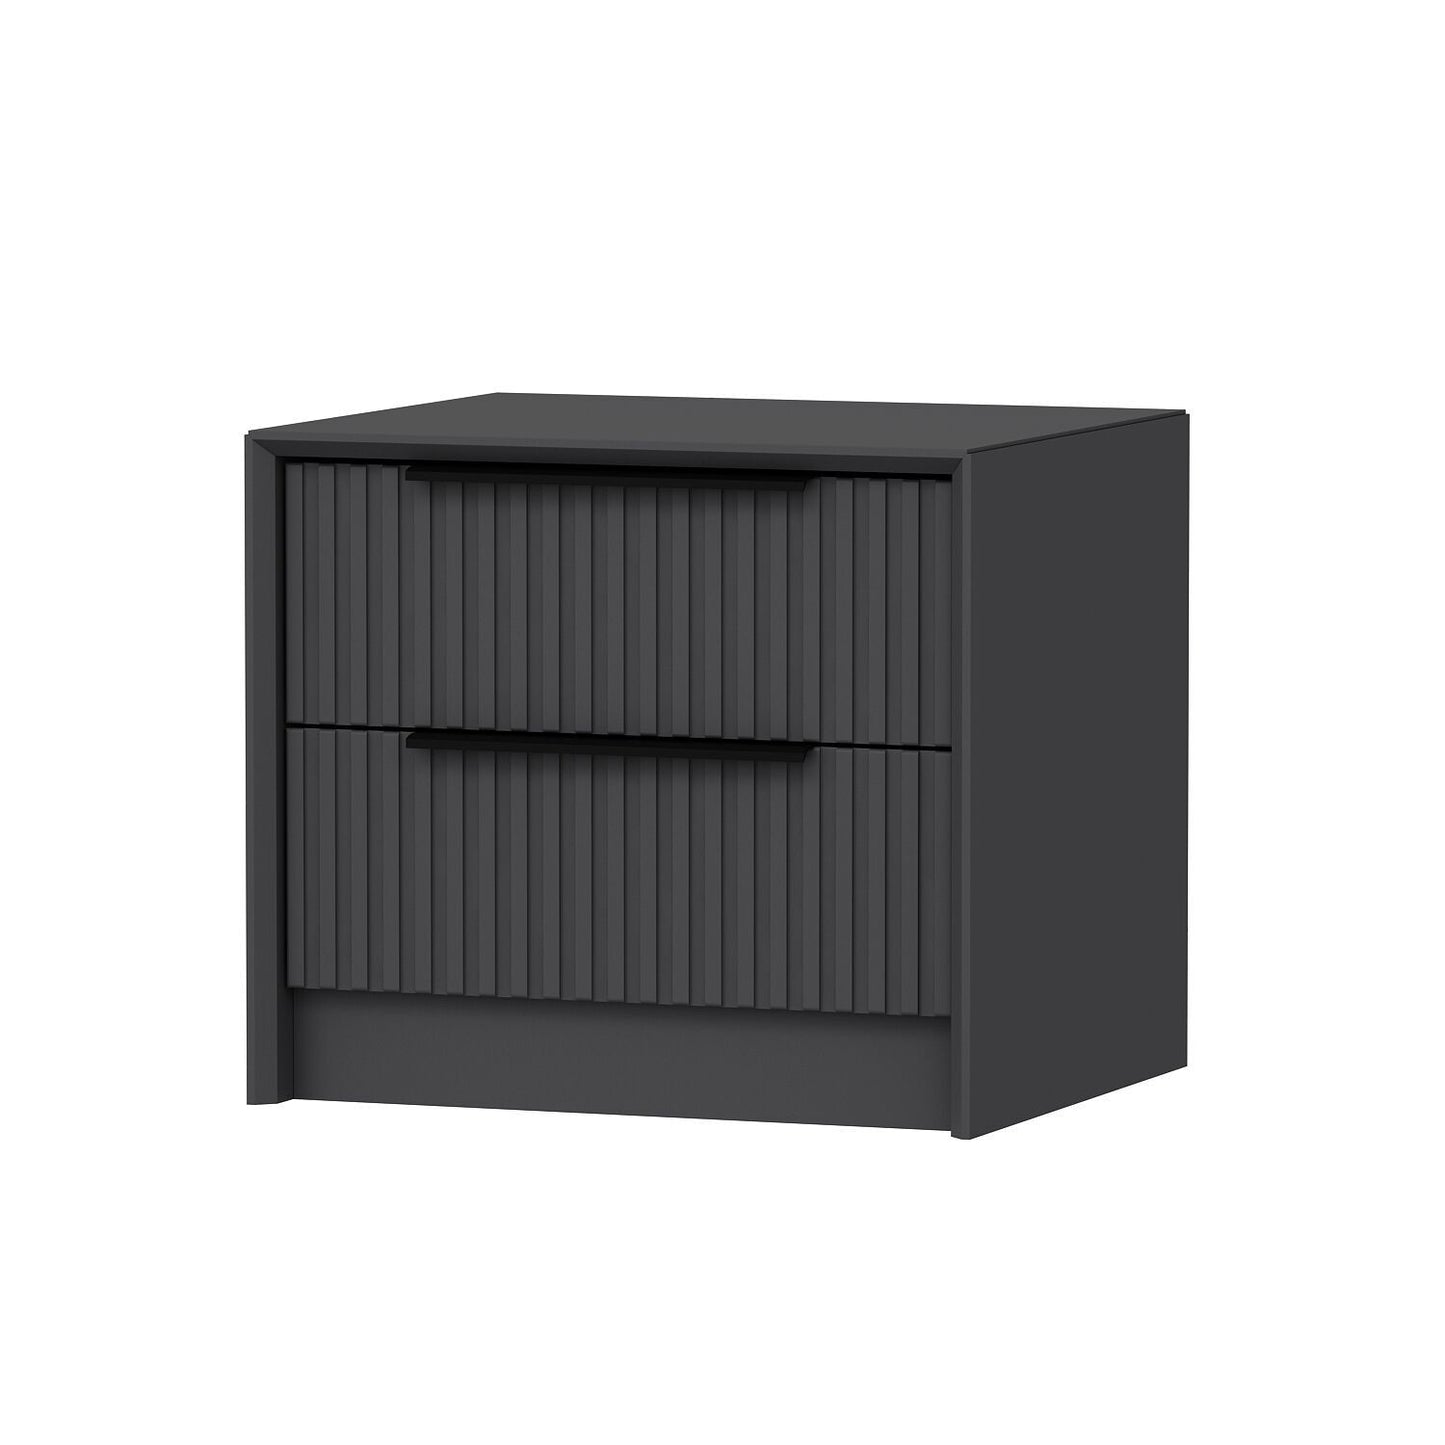 Kale Luxe Soft - 4799 - Nightstand